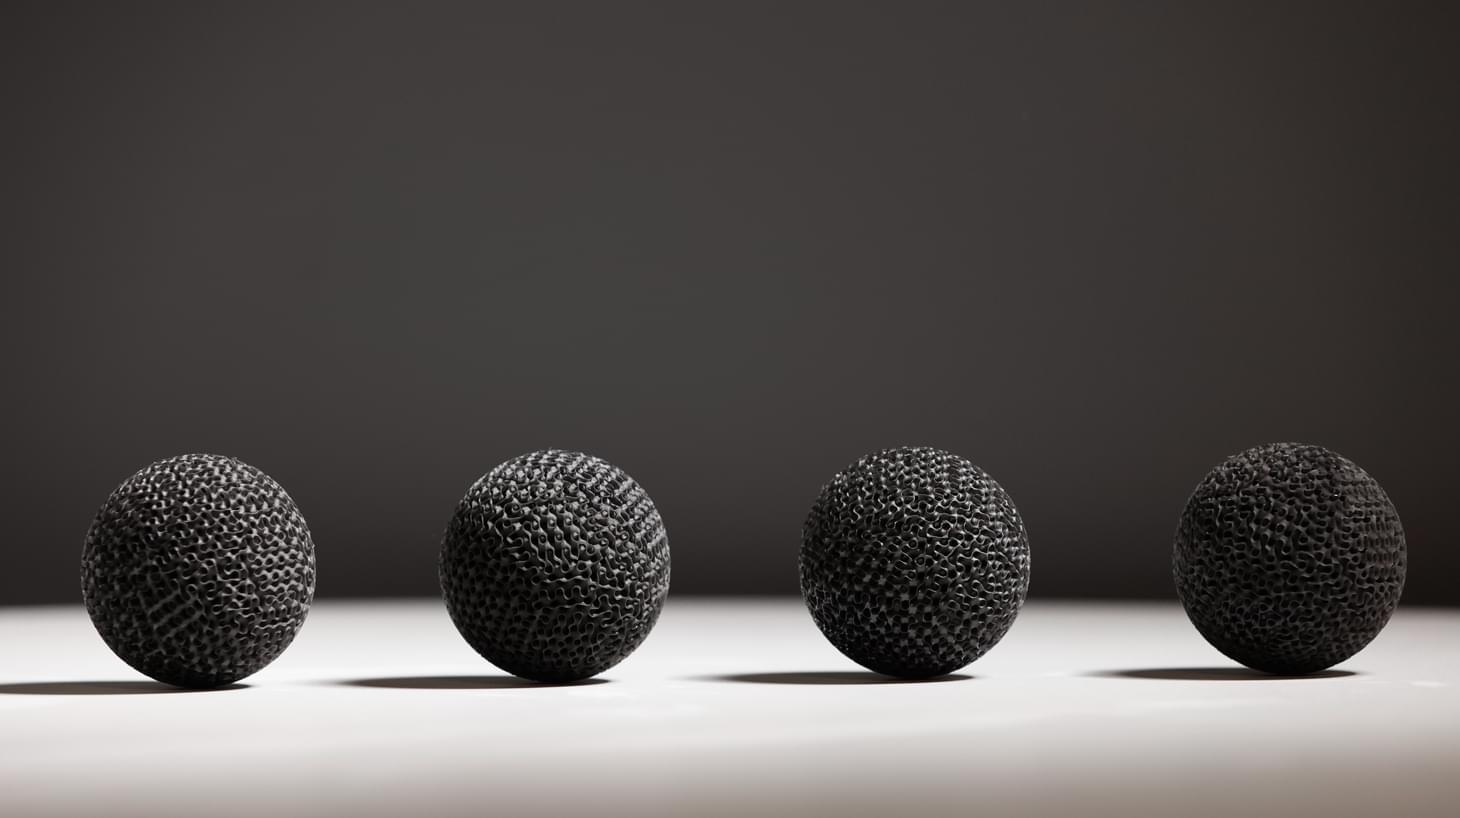 A close up image of four 3D printed metal spheres resting on a table